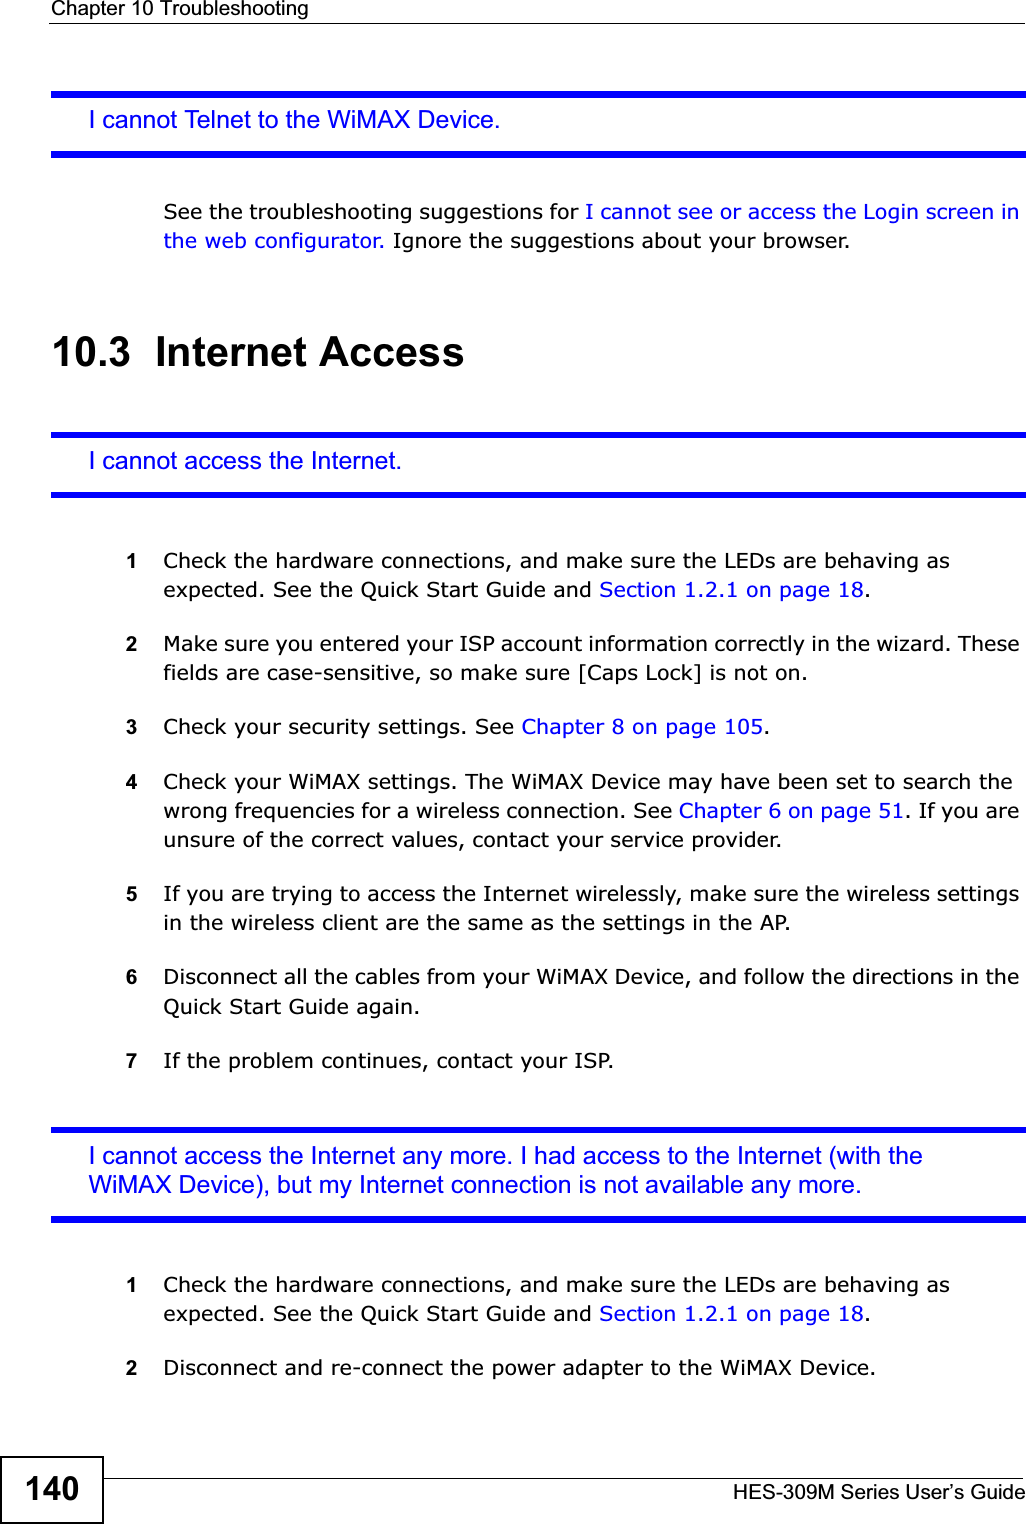 Chapter 10 TroubleshootingHES-309M Series User’s Guide140I cannot Telnet to the WiMAX Device.See the troubleshooting suggestions for I cannot see or access the Login screen in the web configurator. Ignore the suggestions about your browser.10.3  Internet AccessI cannot access the Internet.1Check the hardware connections, and make sure the LEDs are behaving as expected. See the Quick Start Guide and Section 1.2.1 on page 18.2Make sure you entered your ISP account information correctly in the wizard. These fields are case-sensitive, so make sure [Caps Lock] is not on.3Check your security settings. See Chapter 8 on page 105.4Check your WiMAX settings. The WiMAX Device may have been set to search the wrong frequencies for a wireless connection. See Chapter 6 on page 51. If you are unsure of the correct values, contact your service provider.5If you are trying to access the Internet wirelessly, make sure the wireless settings in the wireless client are the same as the settings in the AP.6Disconnect all the cables from your WiMAX Device, and follow the directions in the Quick Start Guide again.7If the problem continues, contact your ISP.I cannot access the Internet any more. I had access to the Internet (with the WiMAX Device), but my Internet connection is not available any more.1Check the hardware connections, and make sure the LEDs are behaving as expected. See the Quick Start Guide and Section 1.2.1 on page 18.2Disconnect and re-connect the power adapter to the WiMAX Device. 